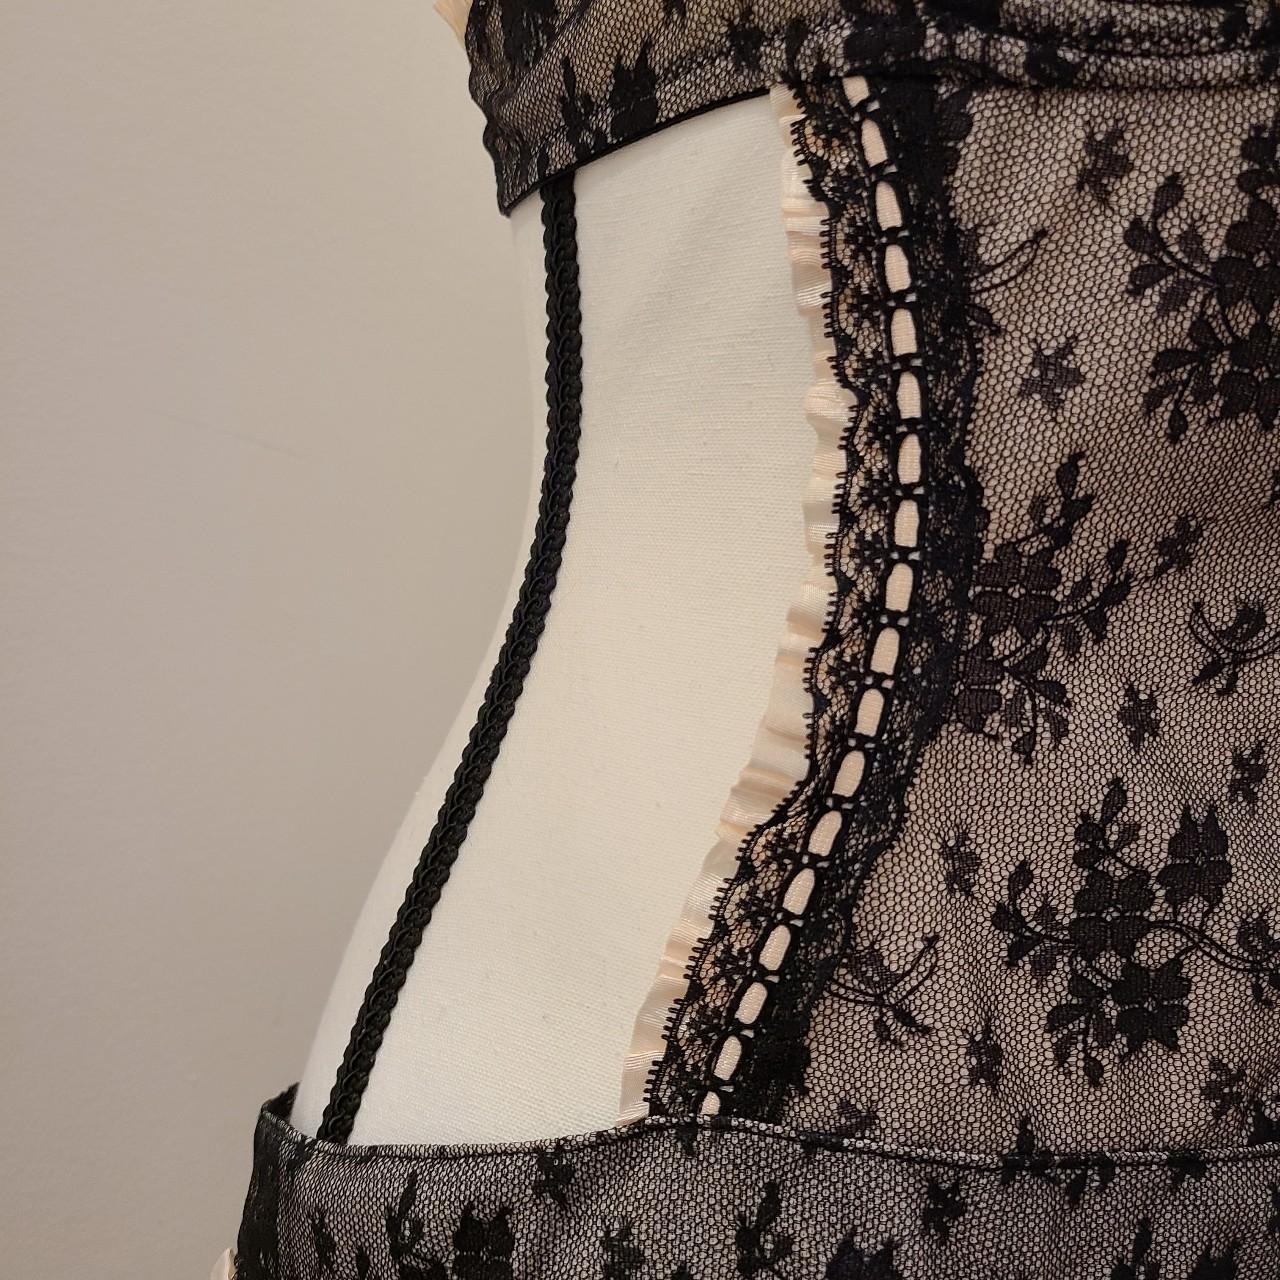 Victoria's Secret Sexy Little Things Maid - Depop